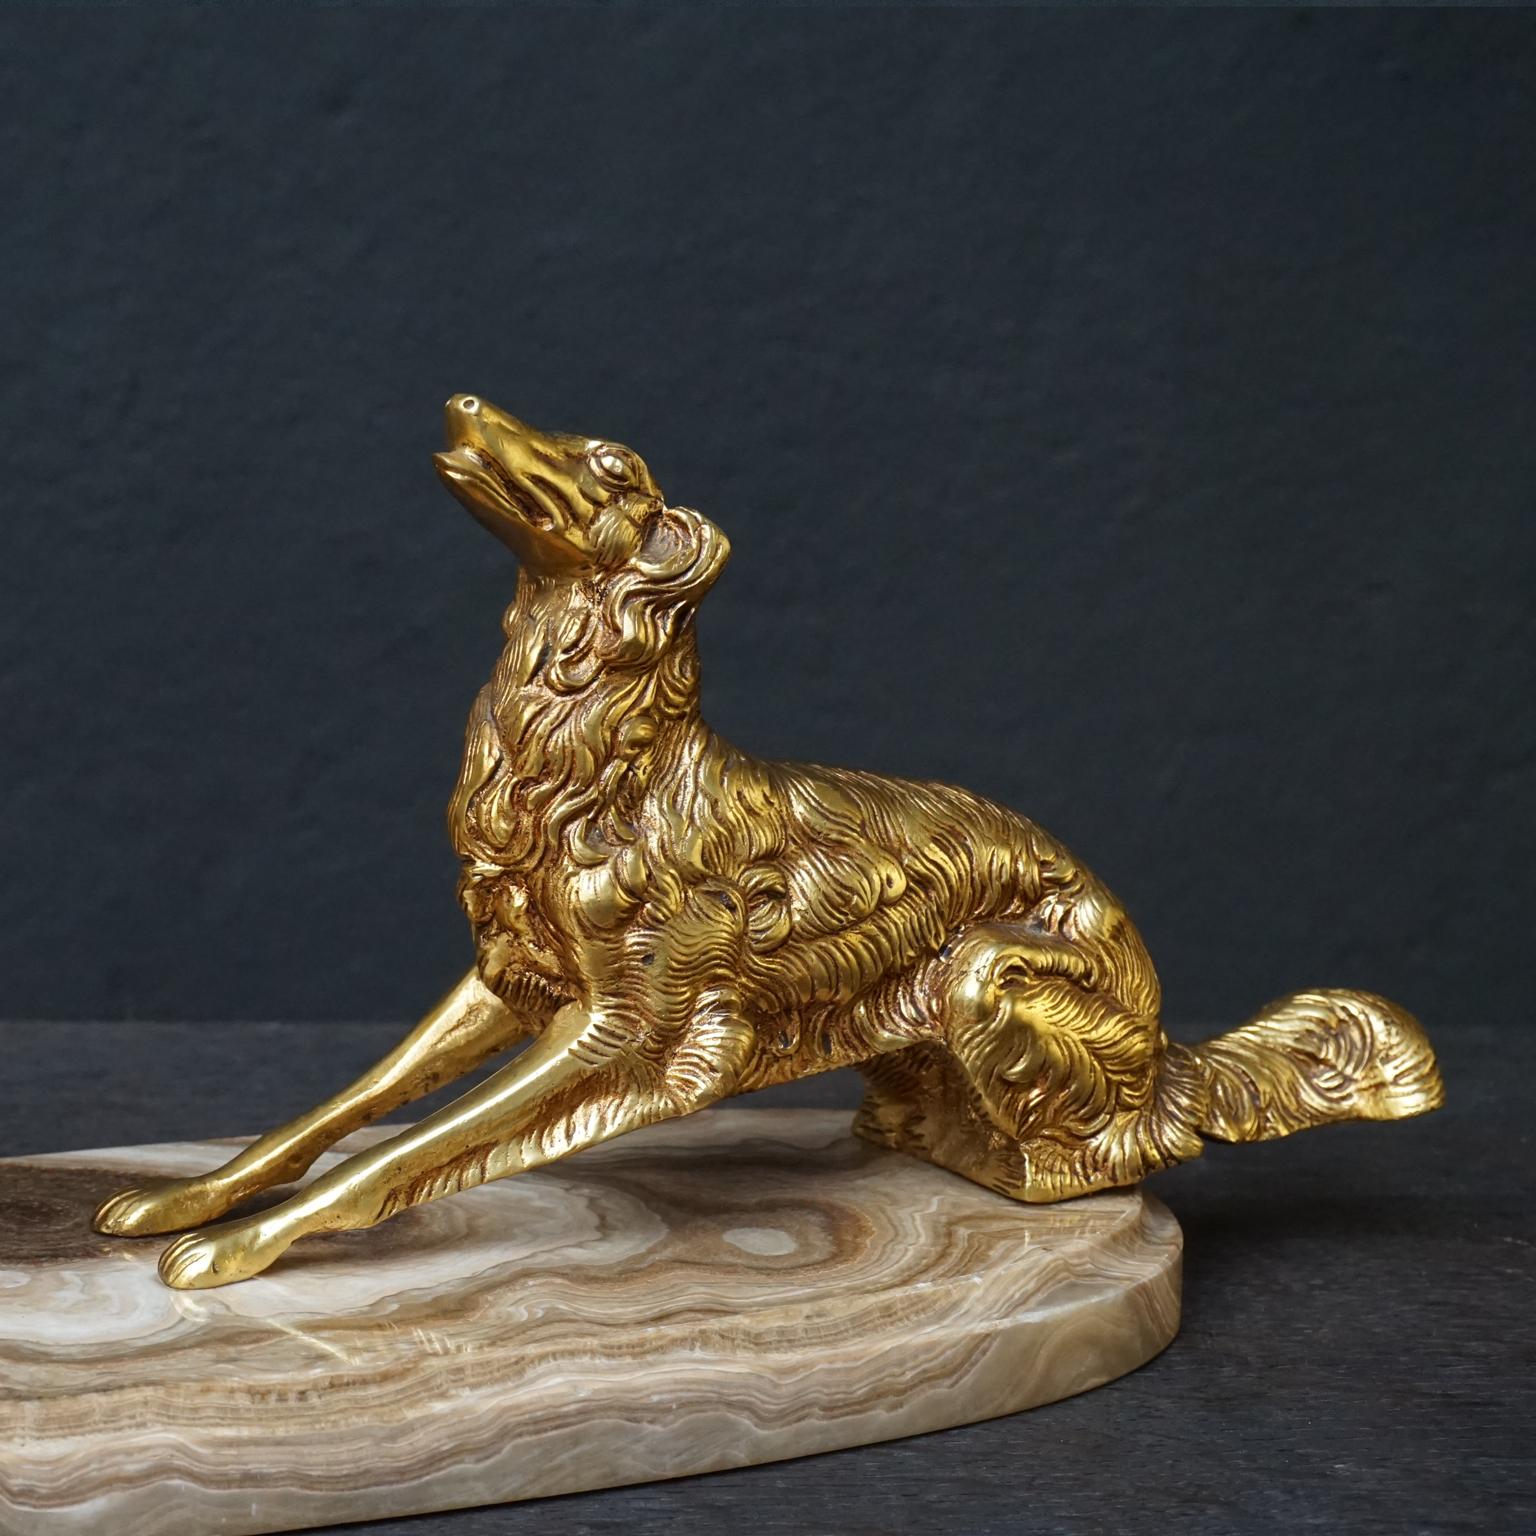 19th C. Art Deco French Brass Borzoi or Barzoi Dogs on 'Cafe au Lait' Marble 8